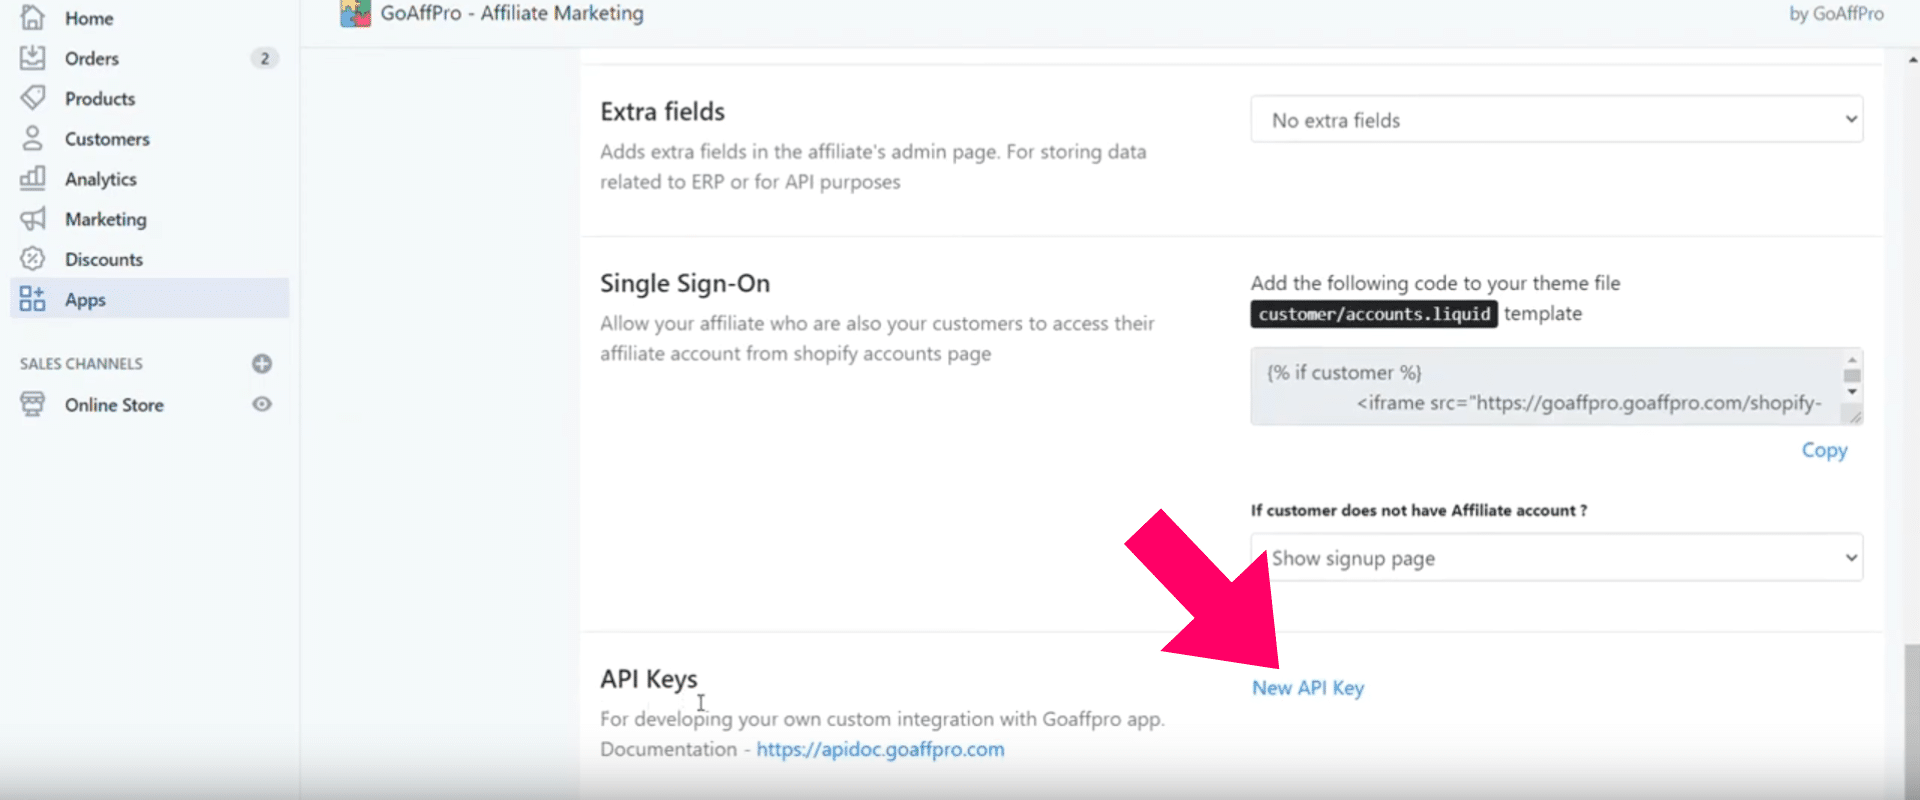 Screenshot of the GoAffPro - Affiliate Marketing app integration page, featuring options for affiliate account setup and API key access. An arrow points to the API Key section at the bottom right. Perfect for Shopify users aiming to streamline their affiliate marketing efforts.